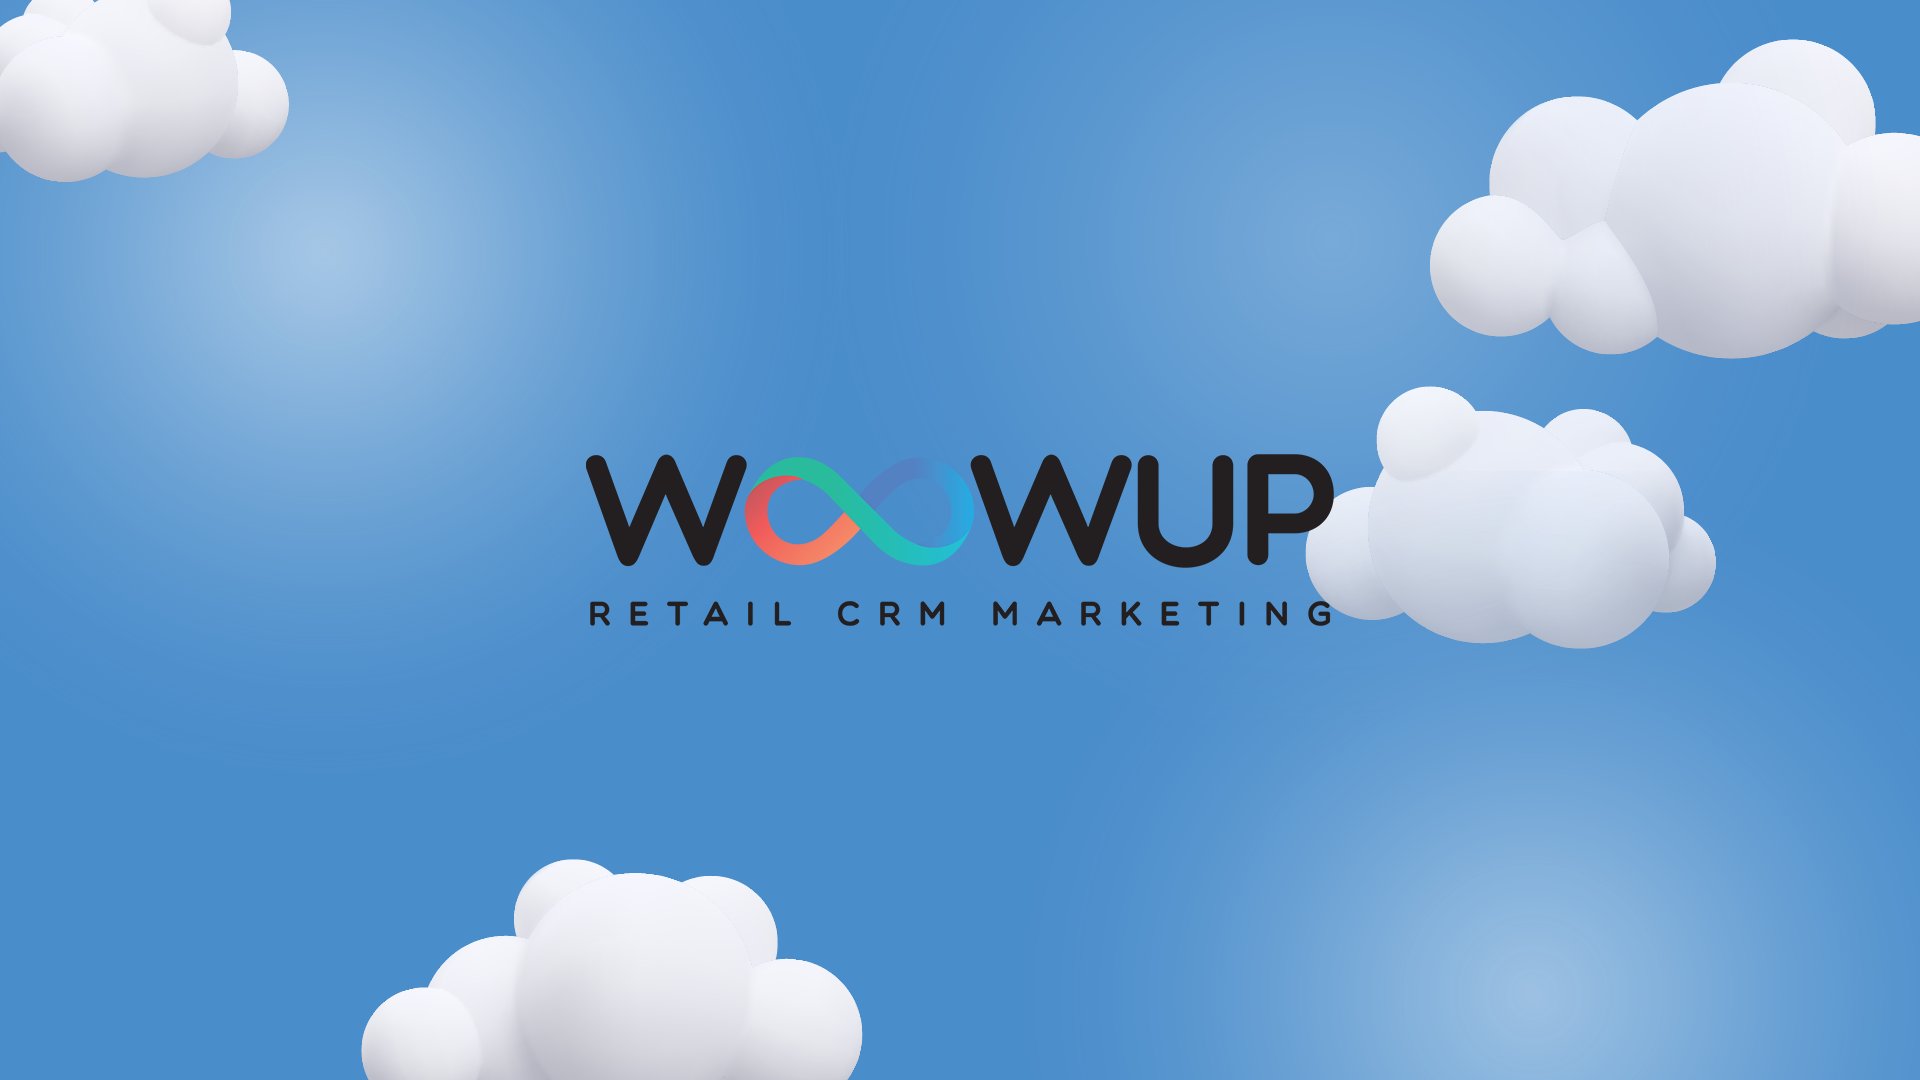 WoowUp CRM retail